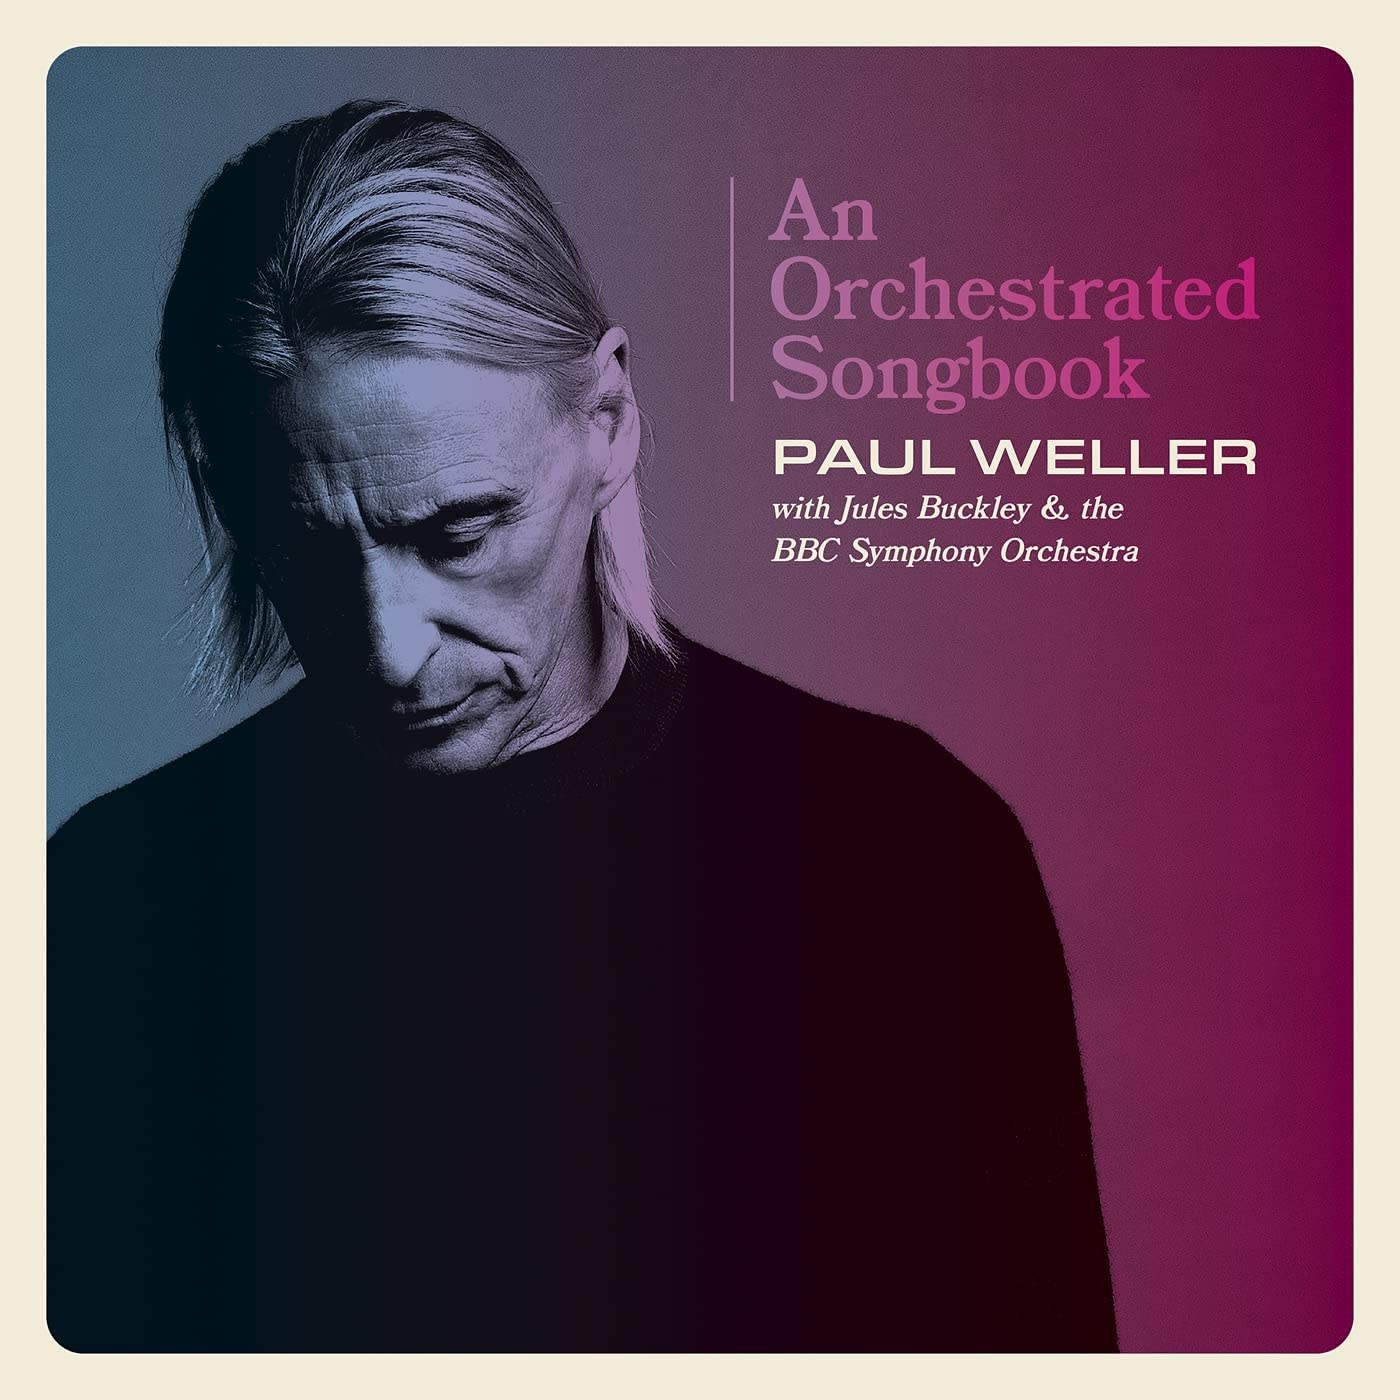 Paul Weller With Jules Buckley & The BBC Symphony Orchestra – An Orchestrated Songbook